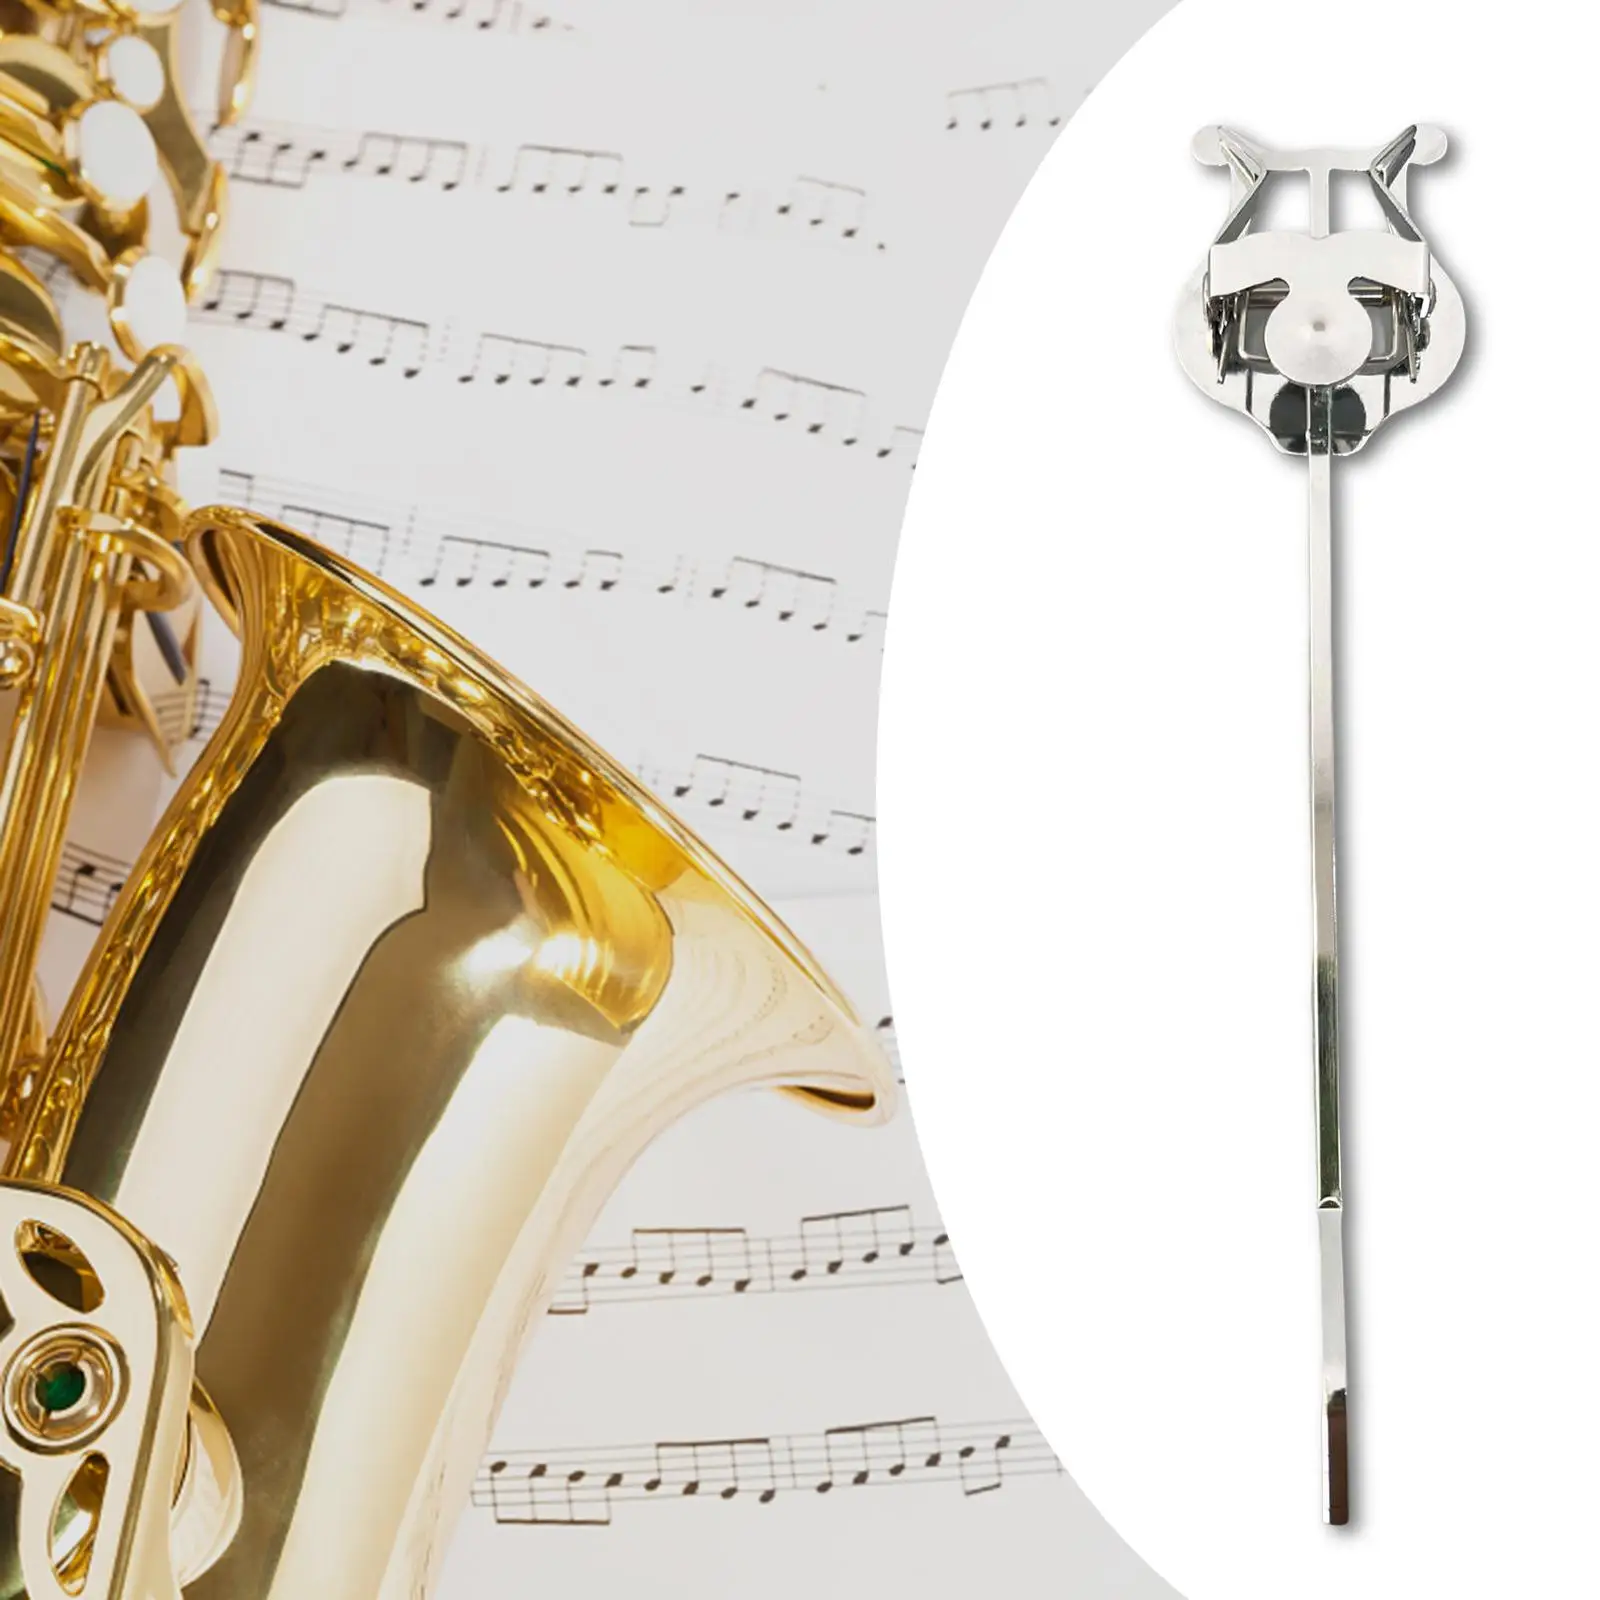 Saxophone Sheet Music Clip Replaces Instrument Holder for Instruments